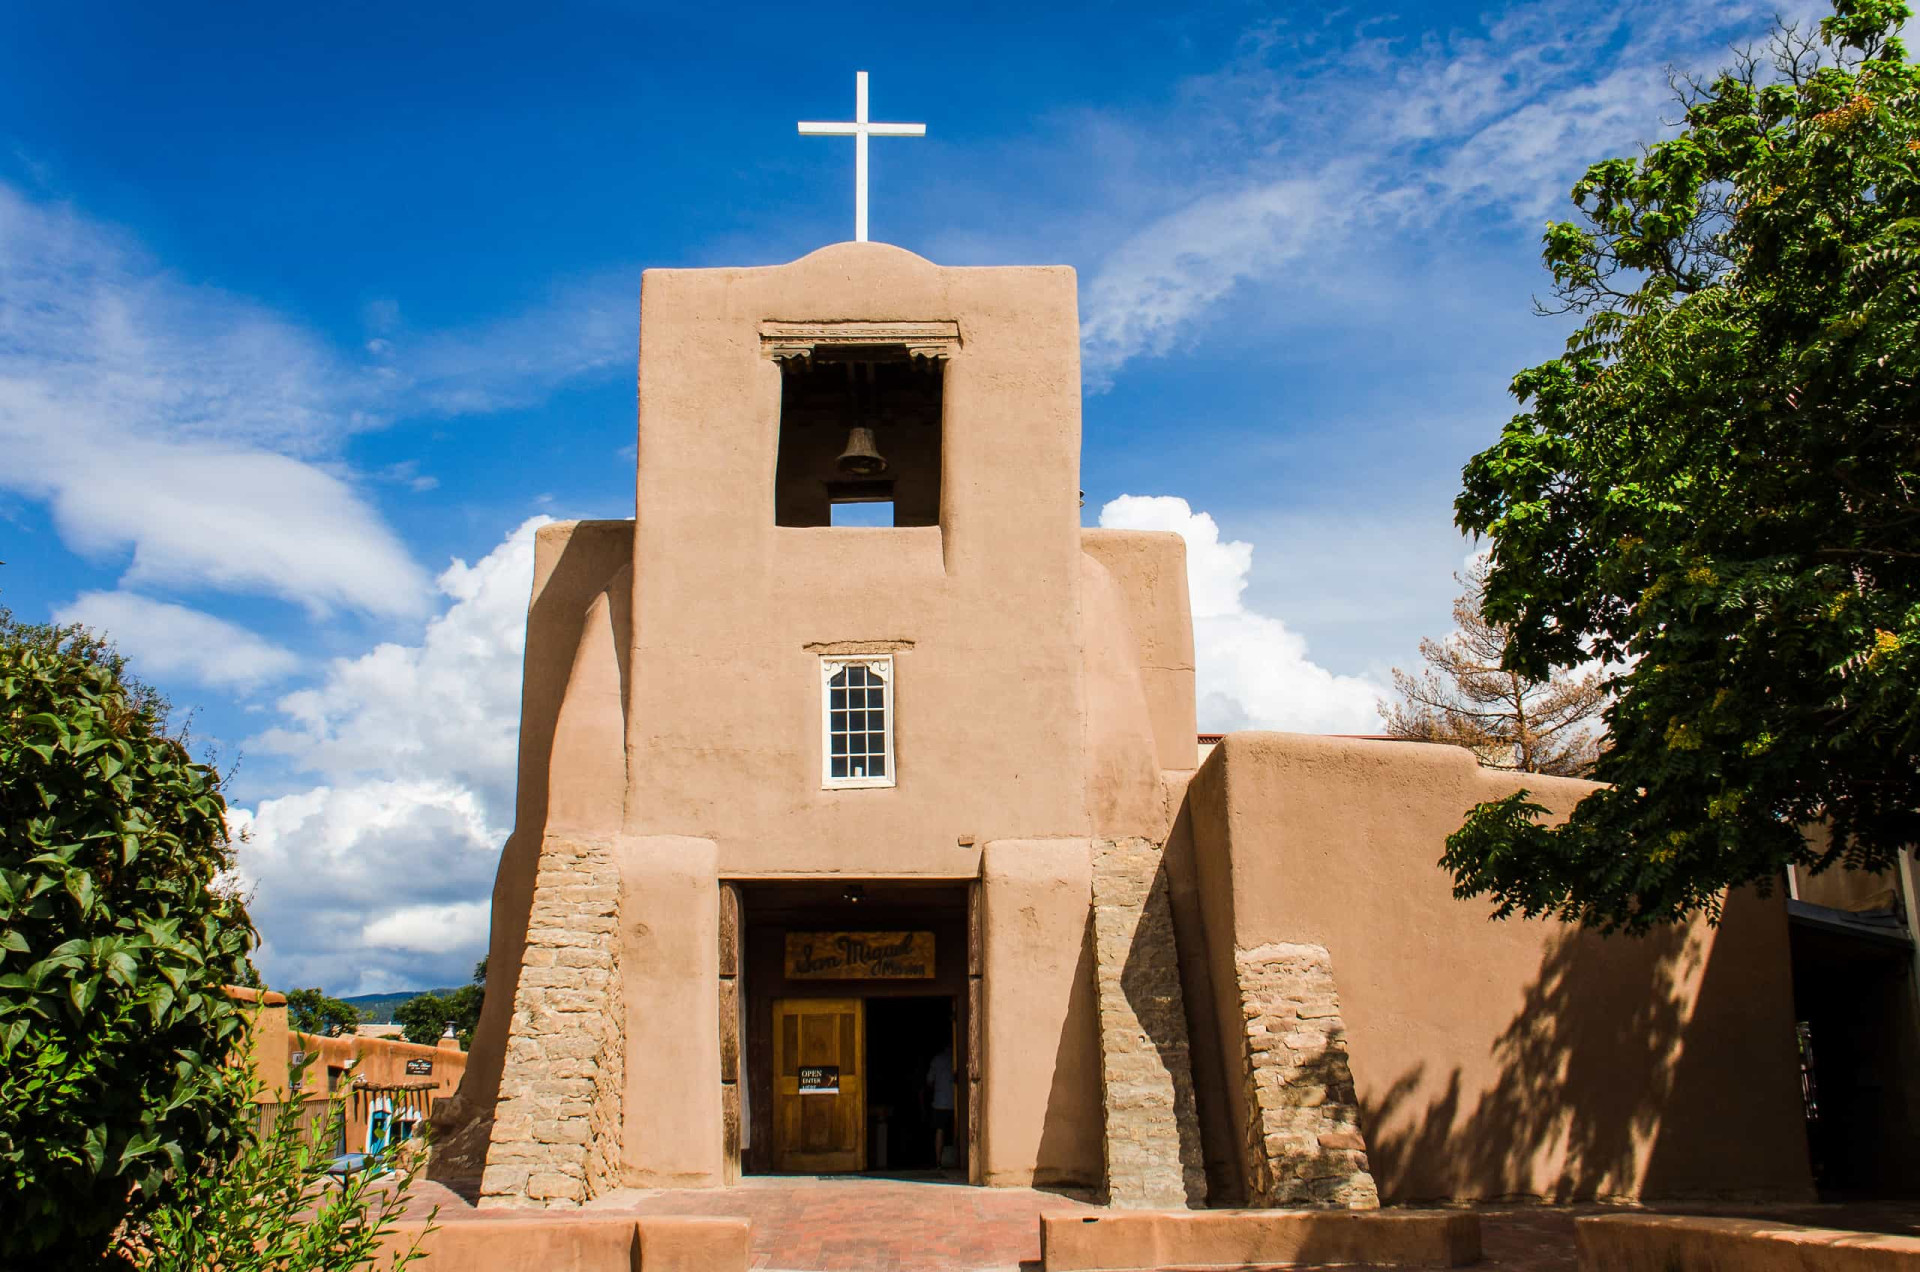 <p>Built in 1610, the San Miguel Mission in Sante Fe is the oldest church in the United States. What you see today is as a result of careful refurbishment over the centuries, with the foundations being the only part of the building from the early 17th century. Nonetheless, it's still a National Historic Landmark.</p>